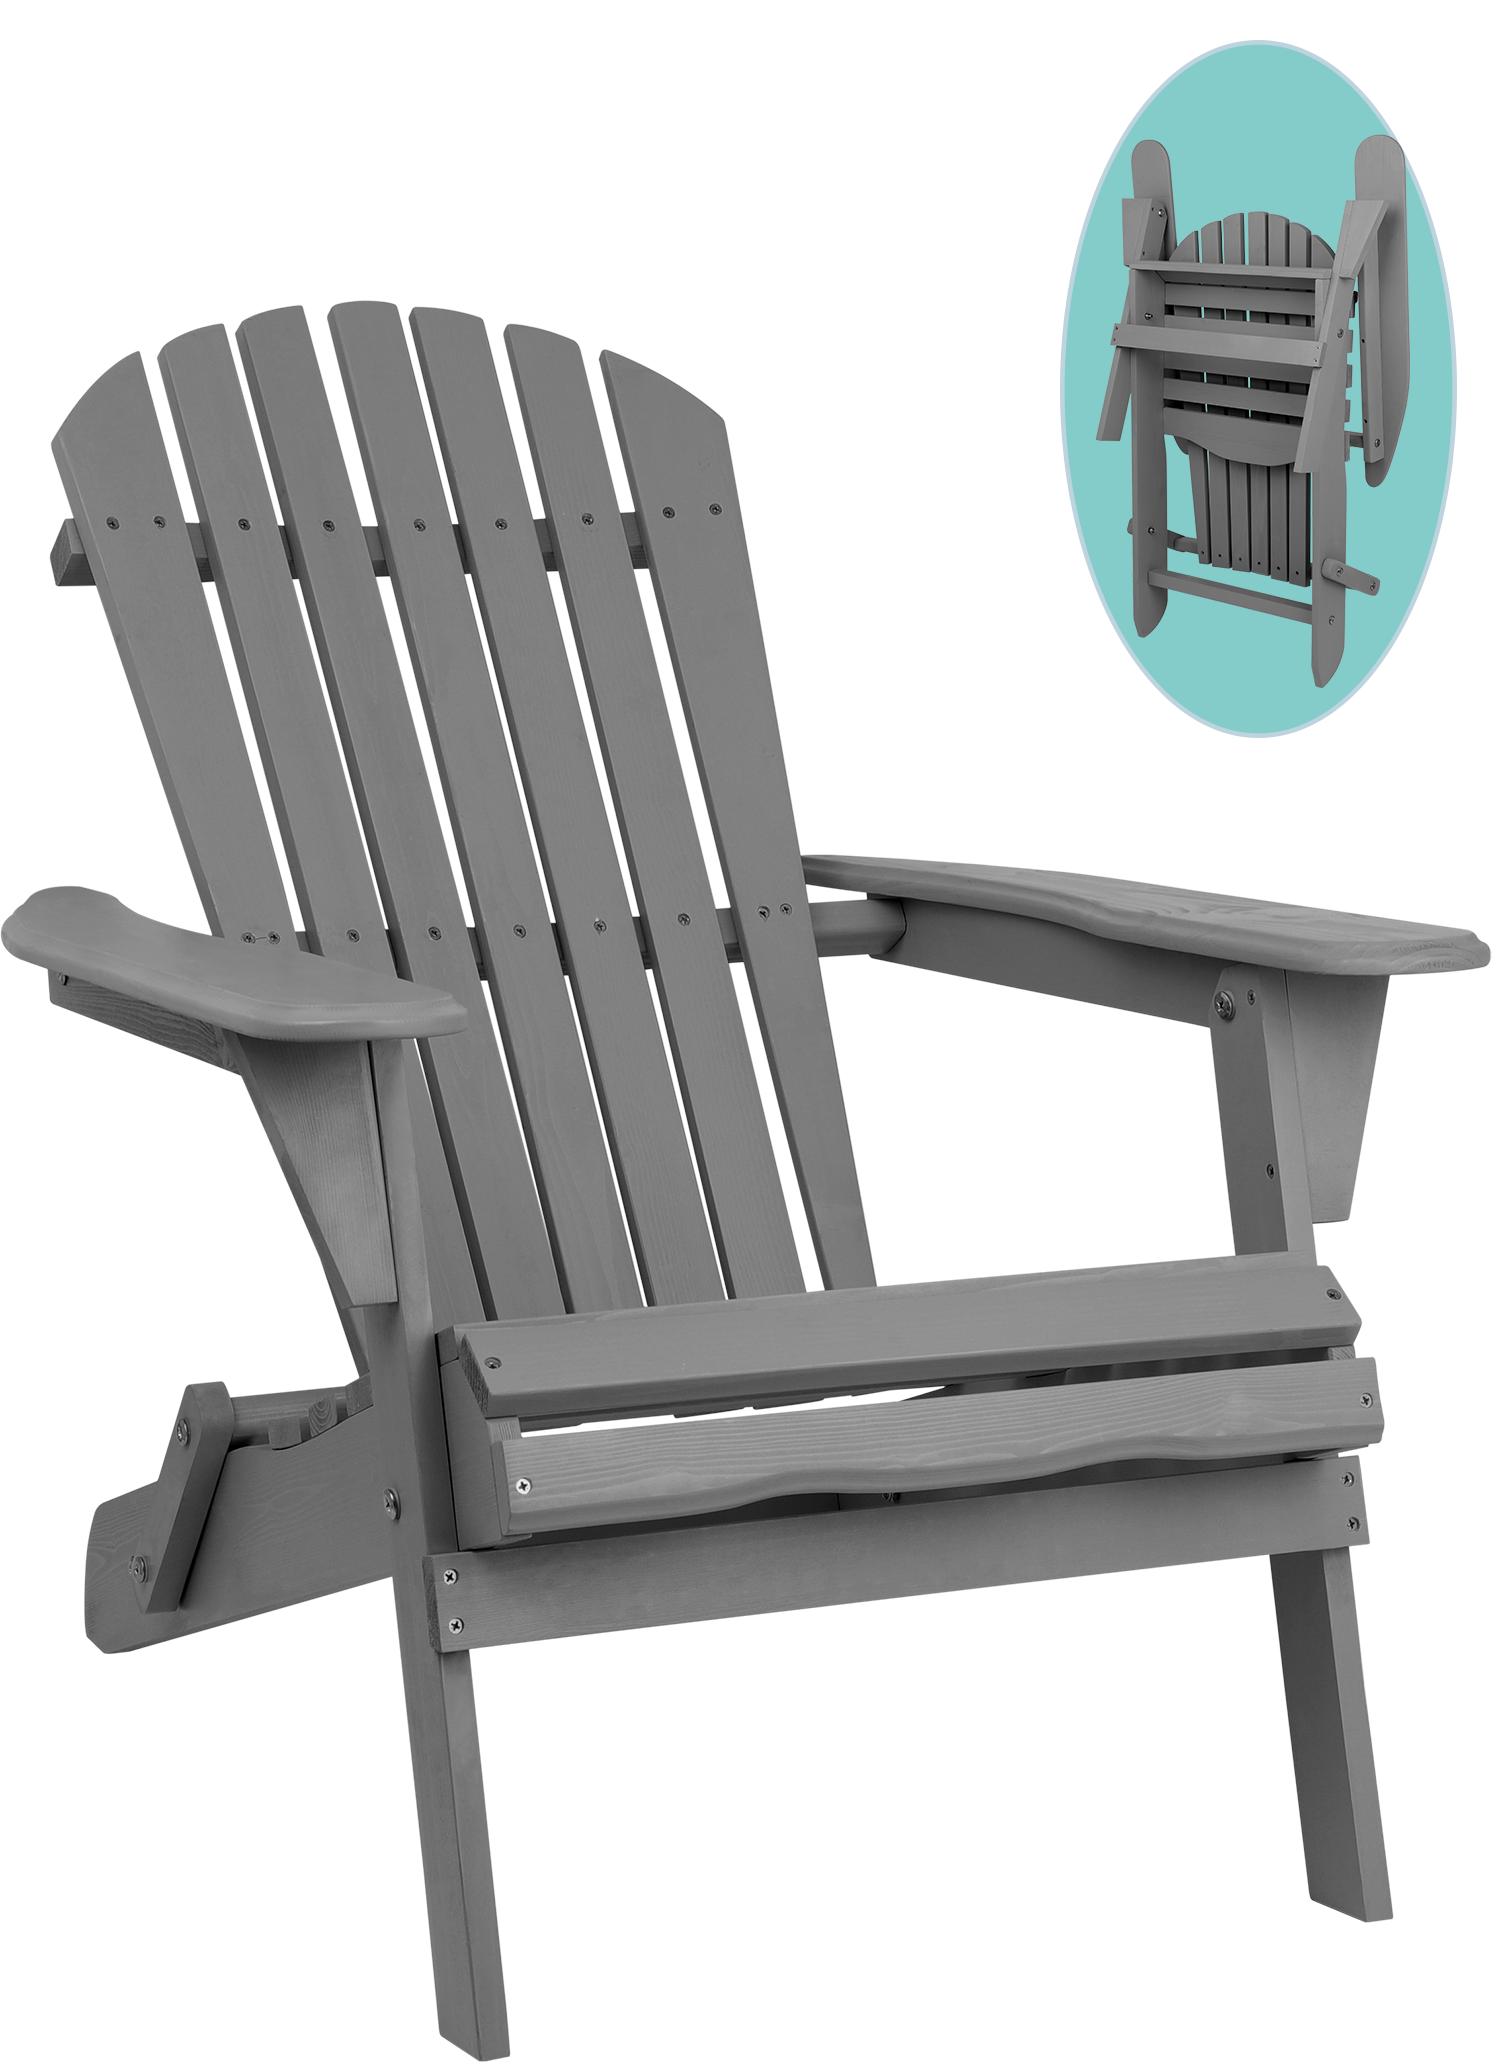 Outdoor Adirondack Chair, Wood Patio Chair Folding Design, High Backrest Fire Pit Lounge Chair for Backyard Porch Poolside Deck, Half Assembled, 1 PCS - image 2 of 10